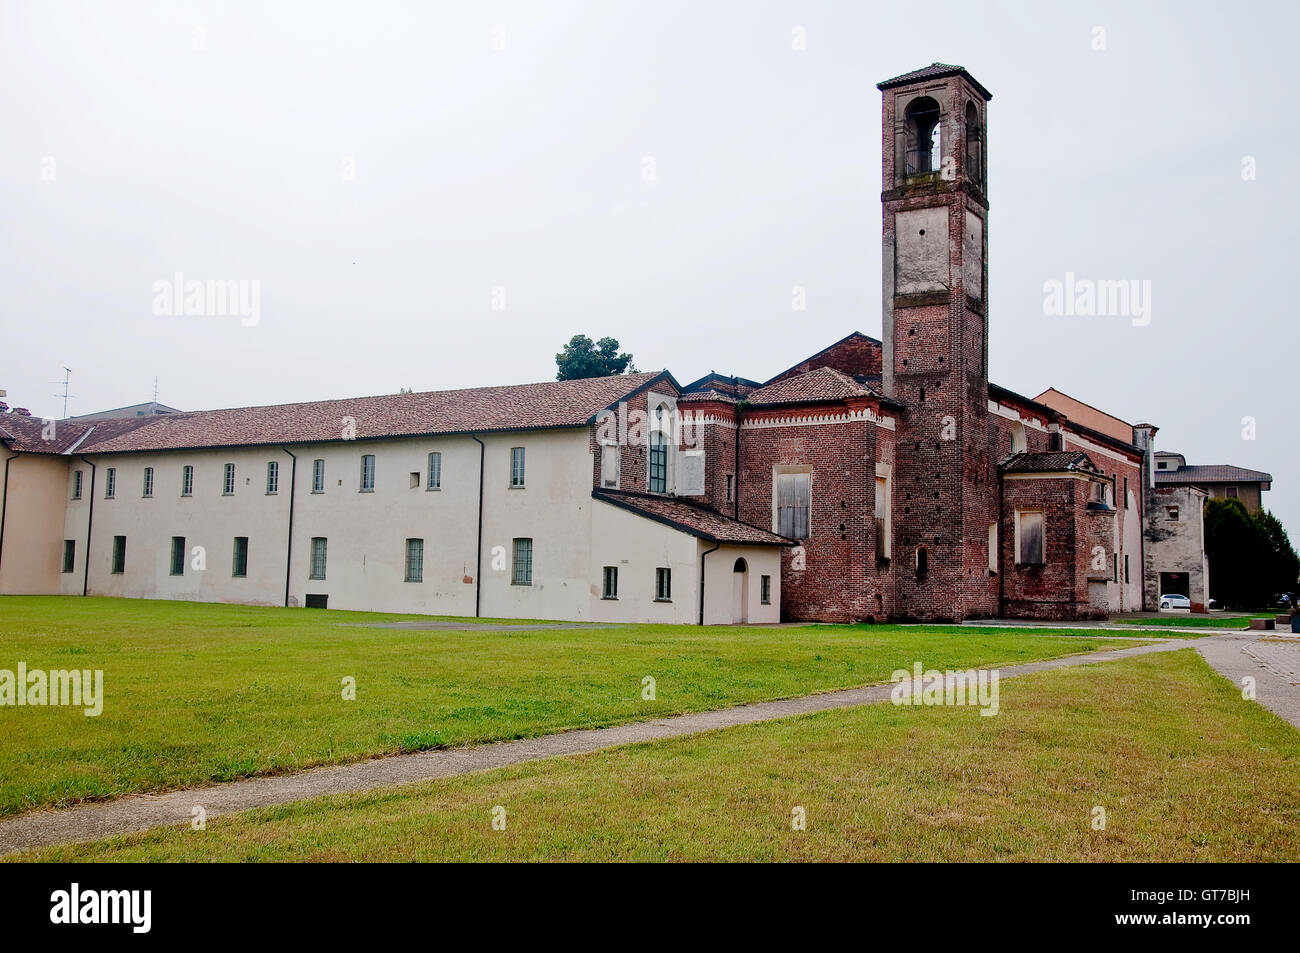 Convent of the announced , located at abbiategrasso a country closest to milan Stock Photo